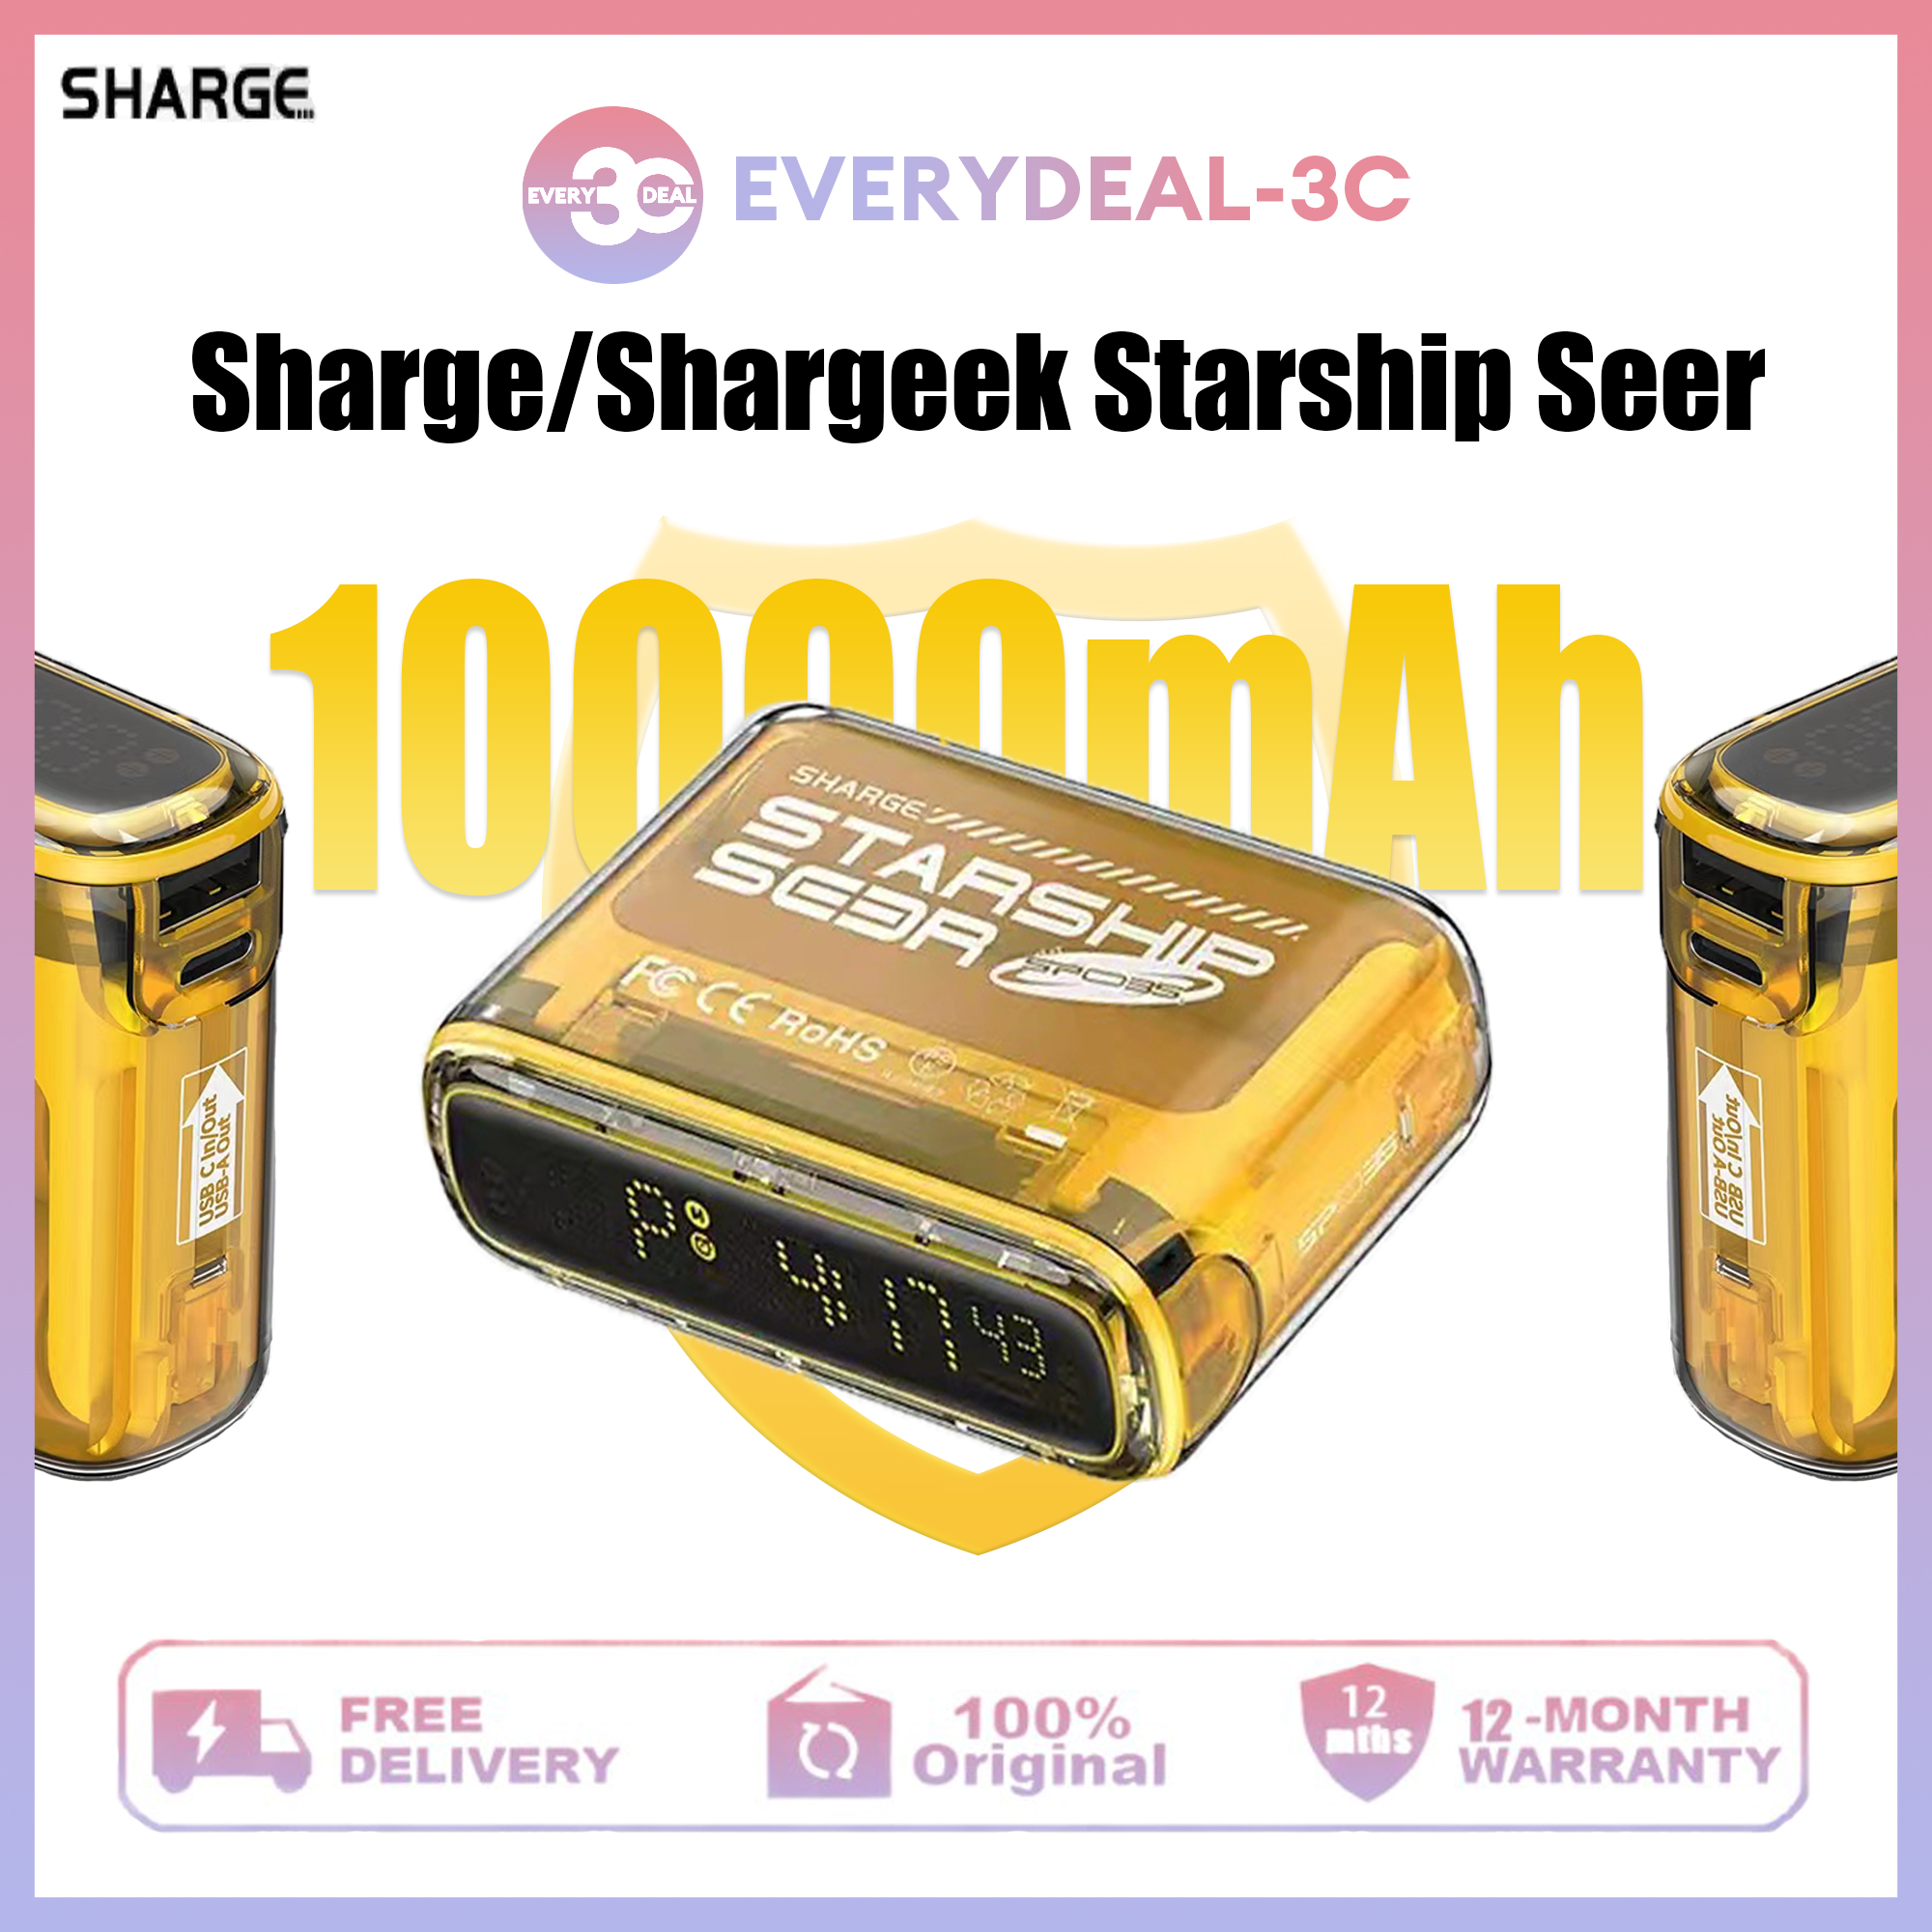 Sharge Starship Seer, 10000mAh USB-C Portable Charger with 35W Fast Charge  and Real-time Power Display, World's First Dual Output Power Bank with time  Function for iPhone, iPad, Samsung Galaxy, etc… 